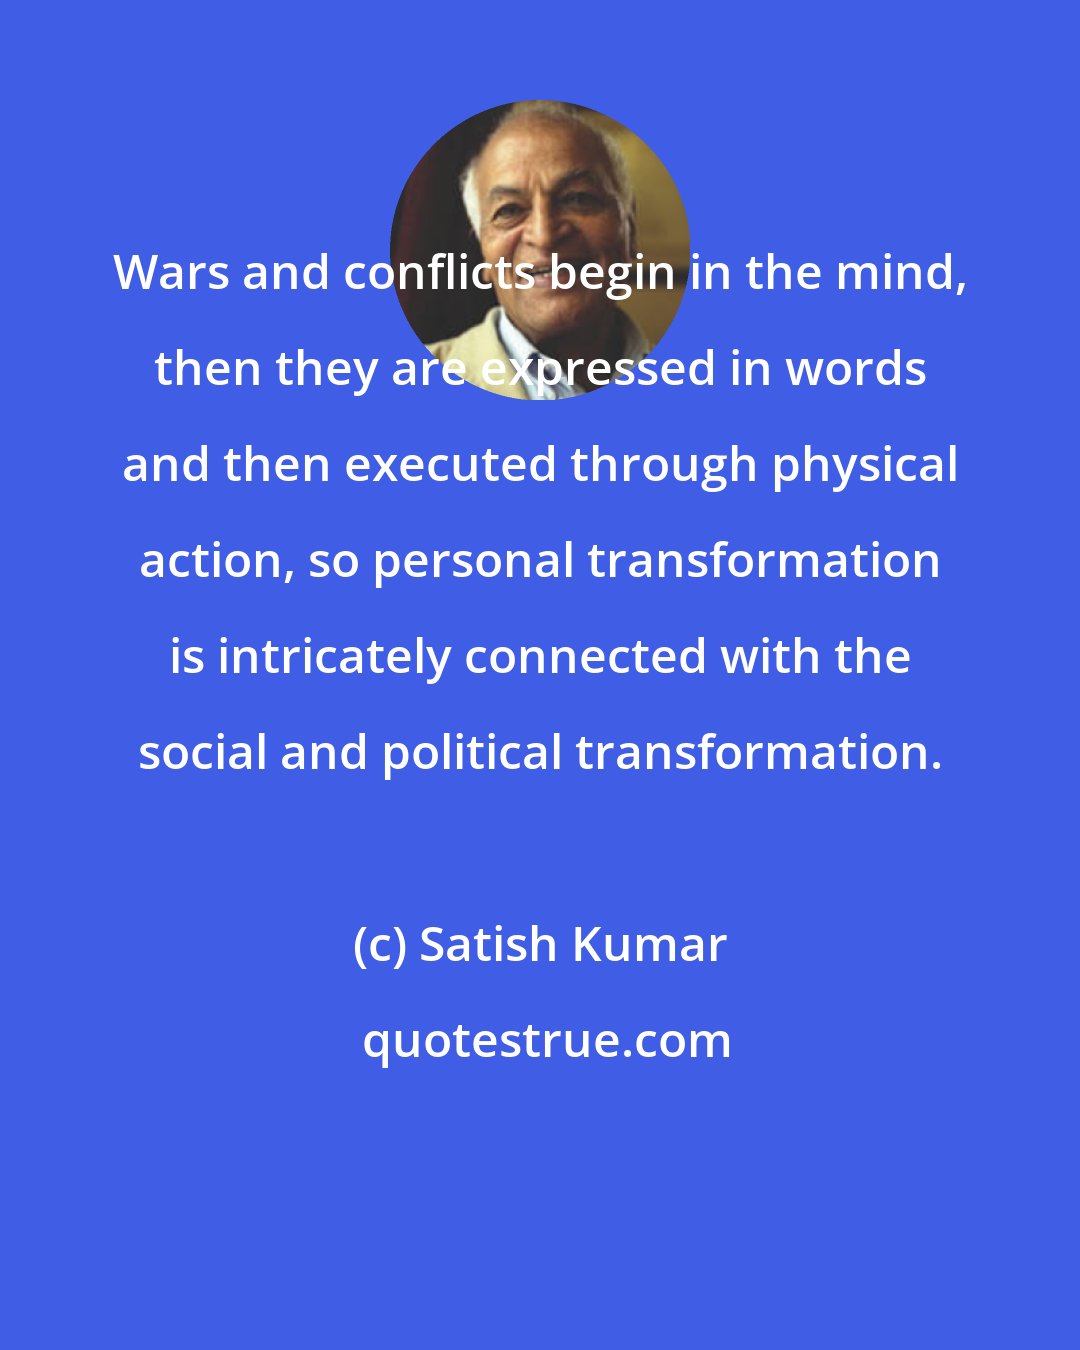 Satish Kumar: Wars and conflicts begin in the mind, then they are expressed in words and then executed through physical action, so personal transformation is intricately connected with the social and political transformation.